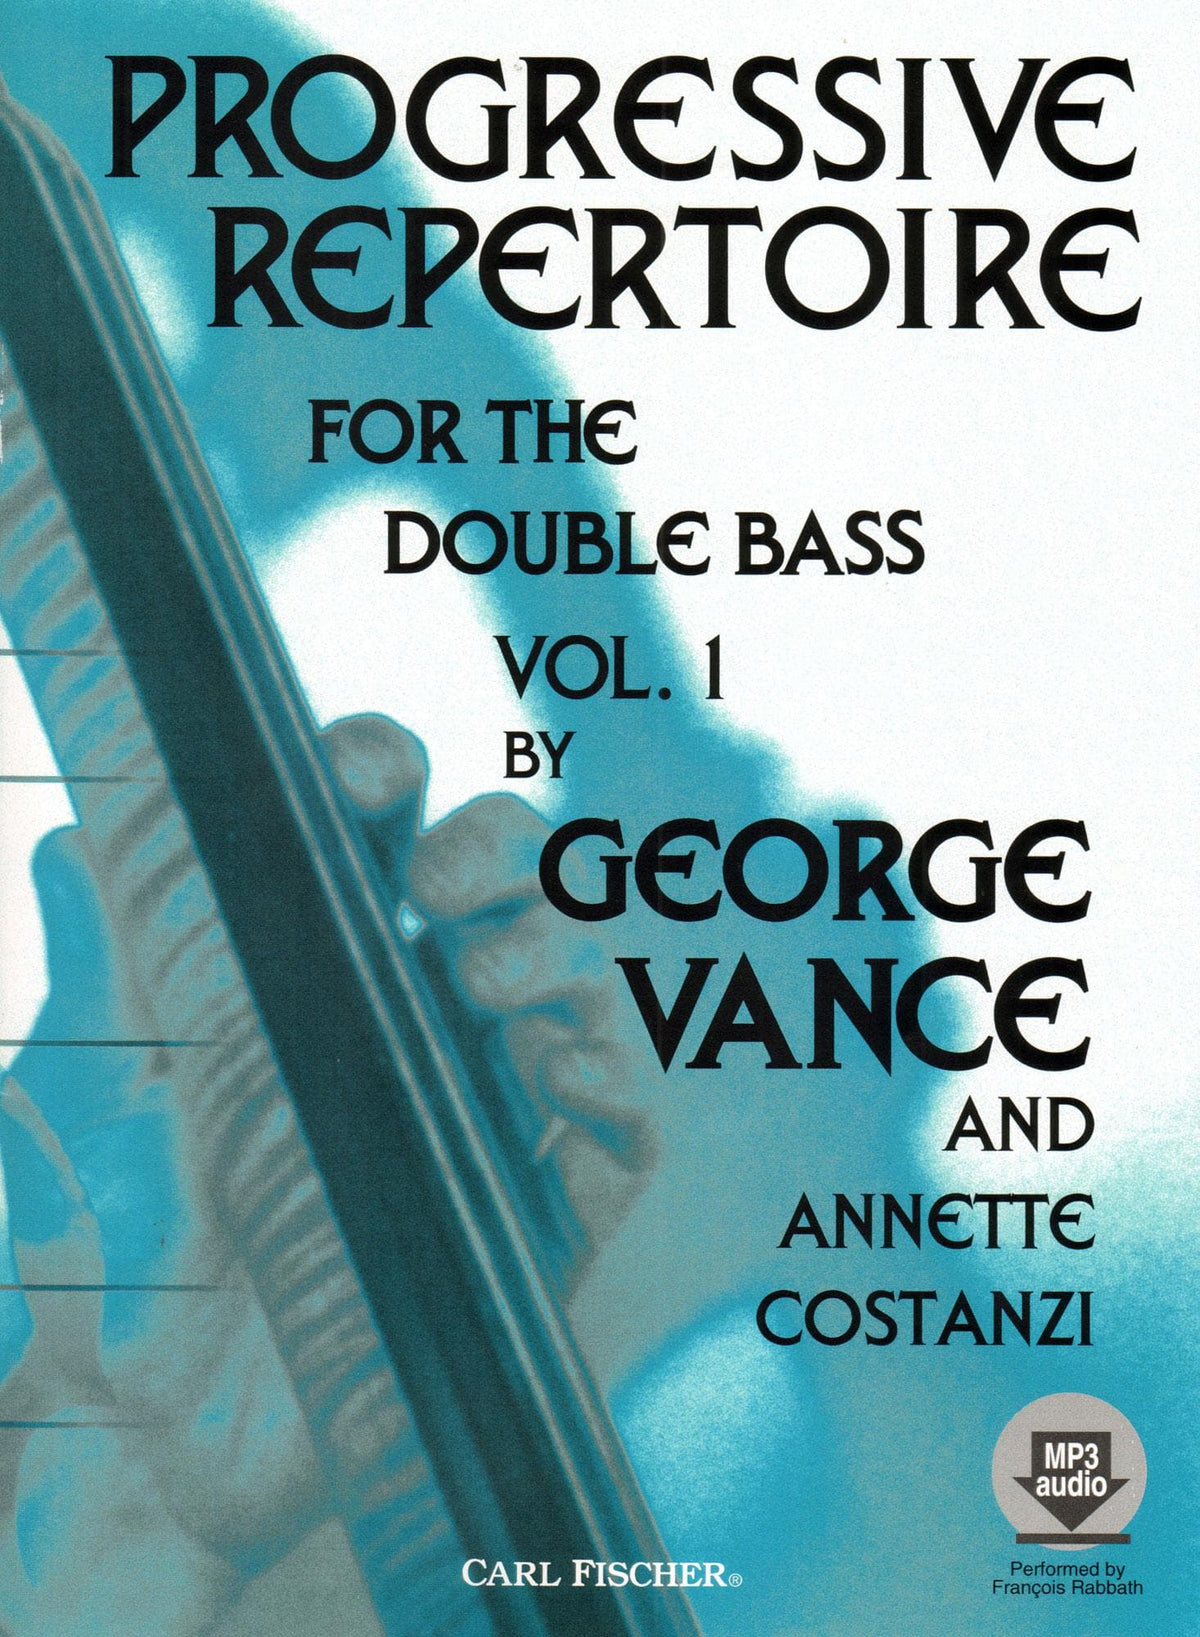 Progressive Repertoire for the Double Bass - Volume 1 Bass Book w/ Online Audio Access - by George Vance - Published by Carl Fischer